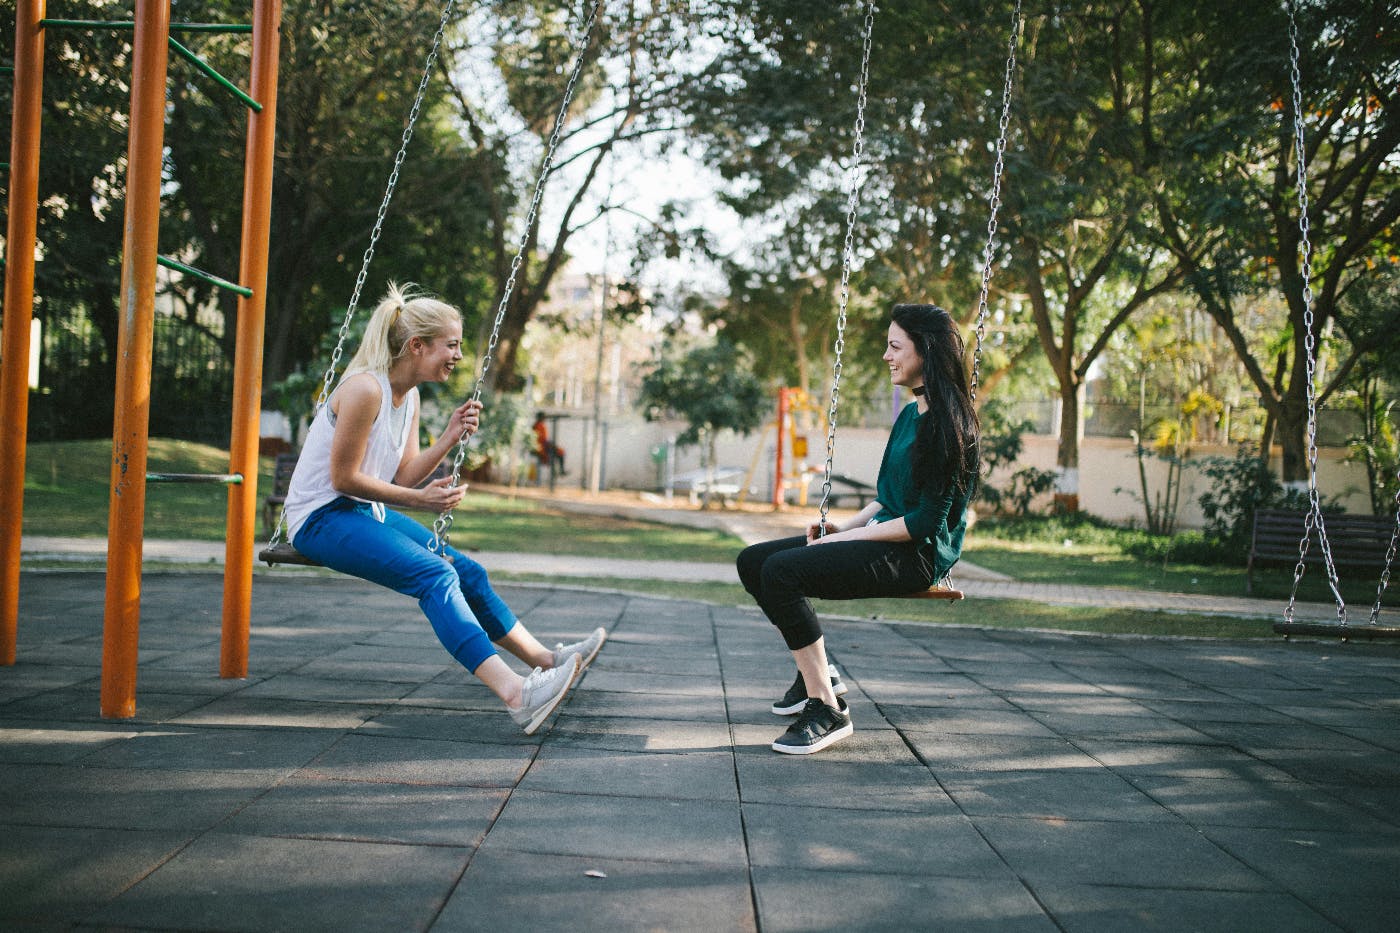 Two women on a swing set talking to each other